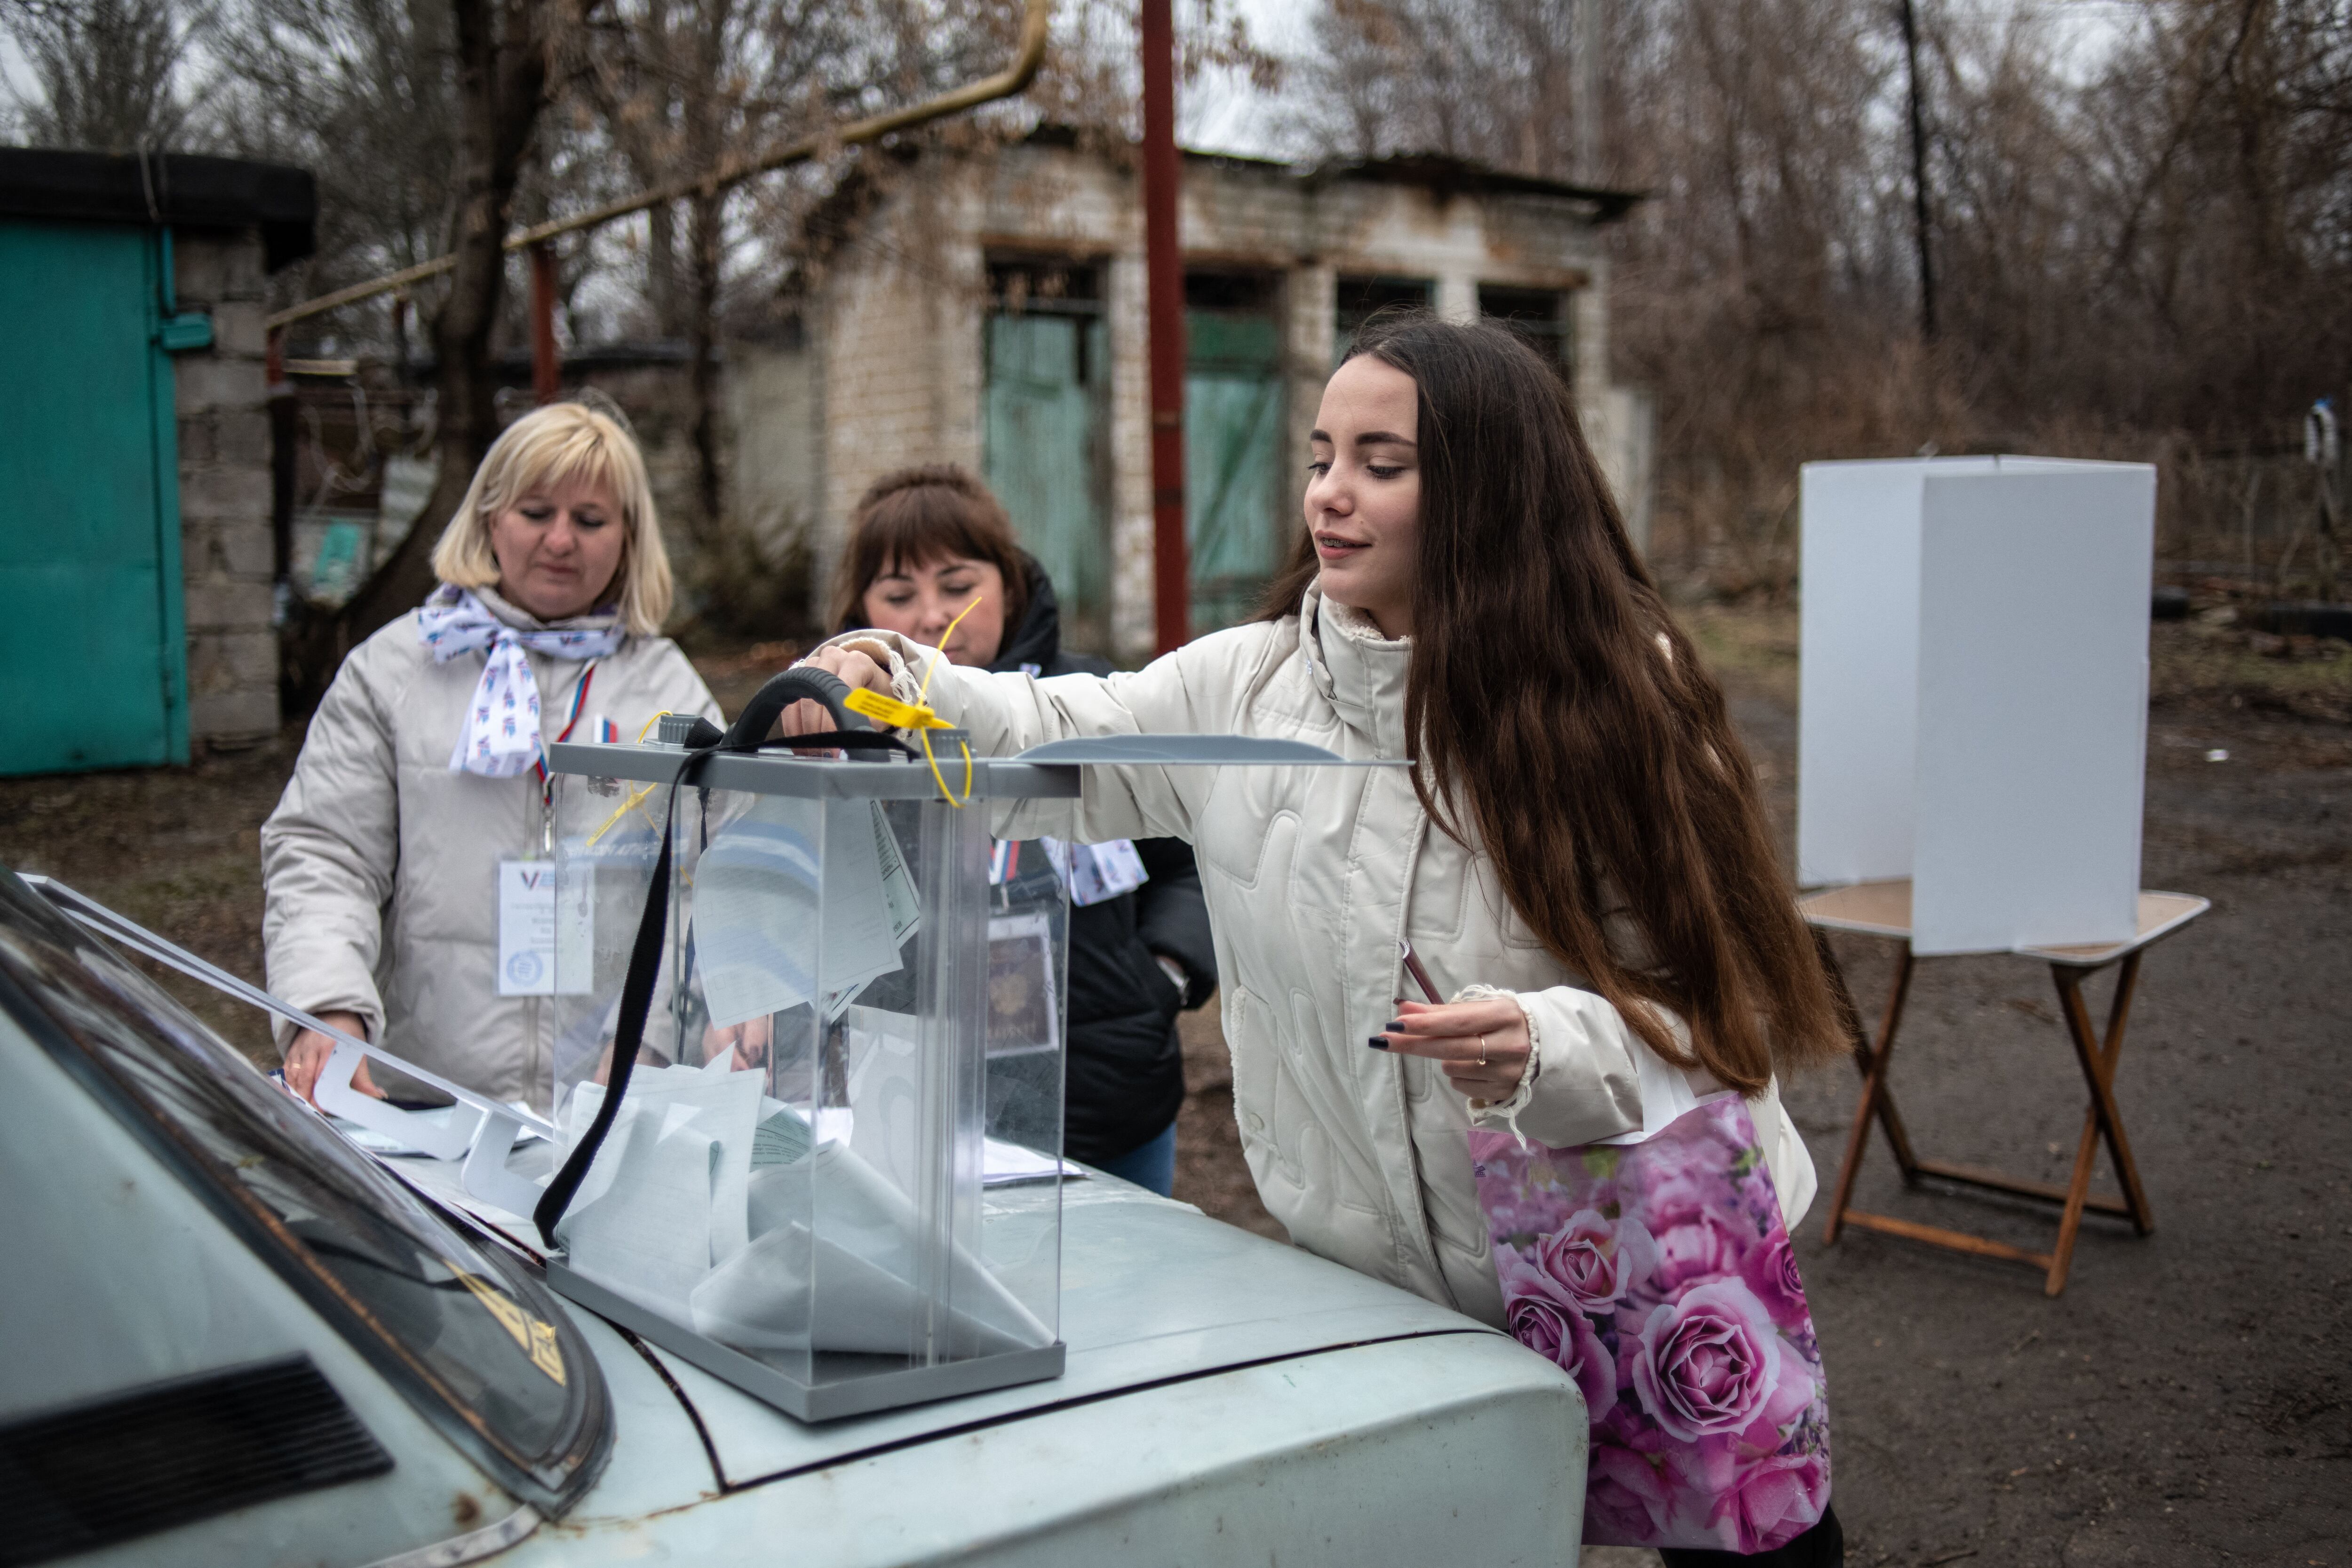 A woman votes at a mobile polling station during early voting for Russia's presidential elections in Donetsk, Russian-controlled Ukraine, amid the Russia-Ukraine conflict on March 14, 2024. (Photo by STRINGER/AFP)